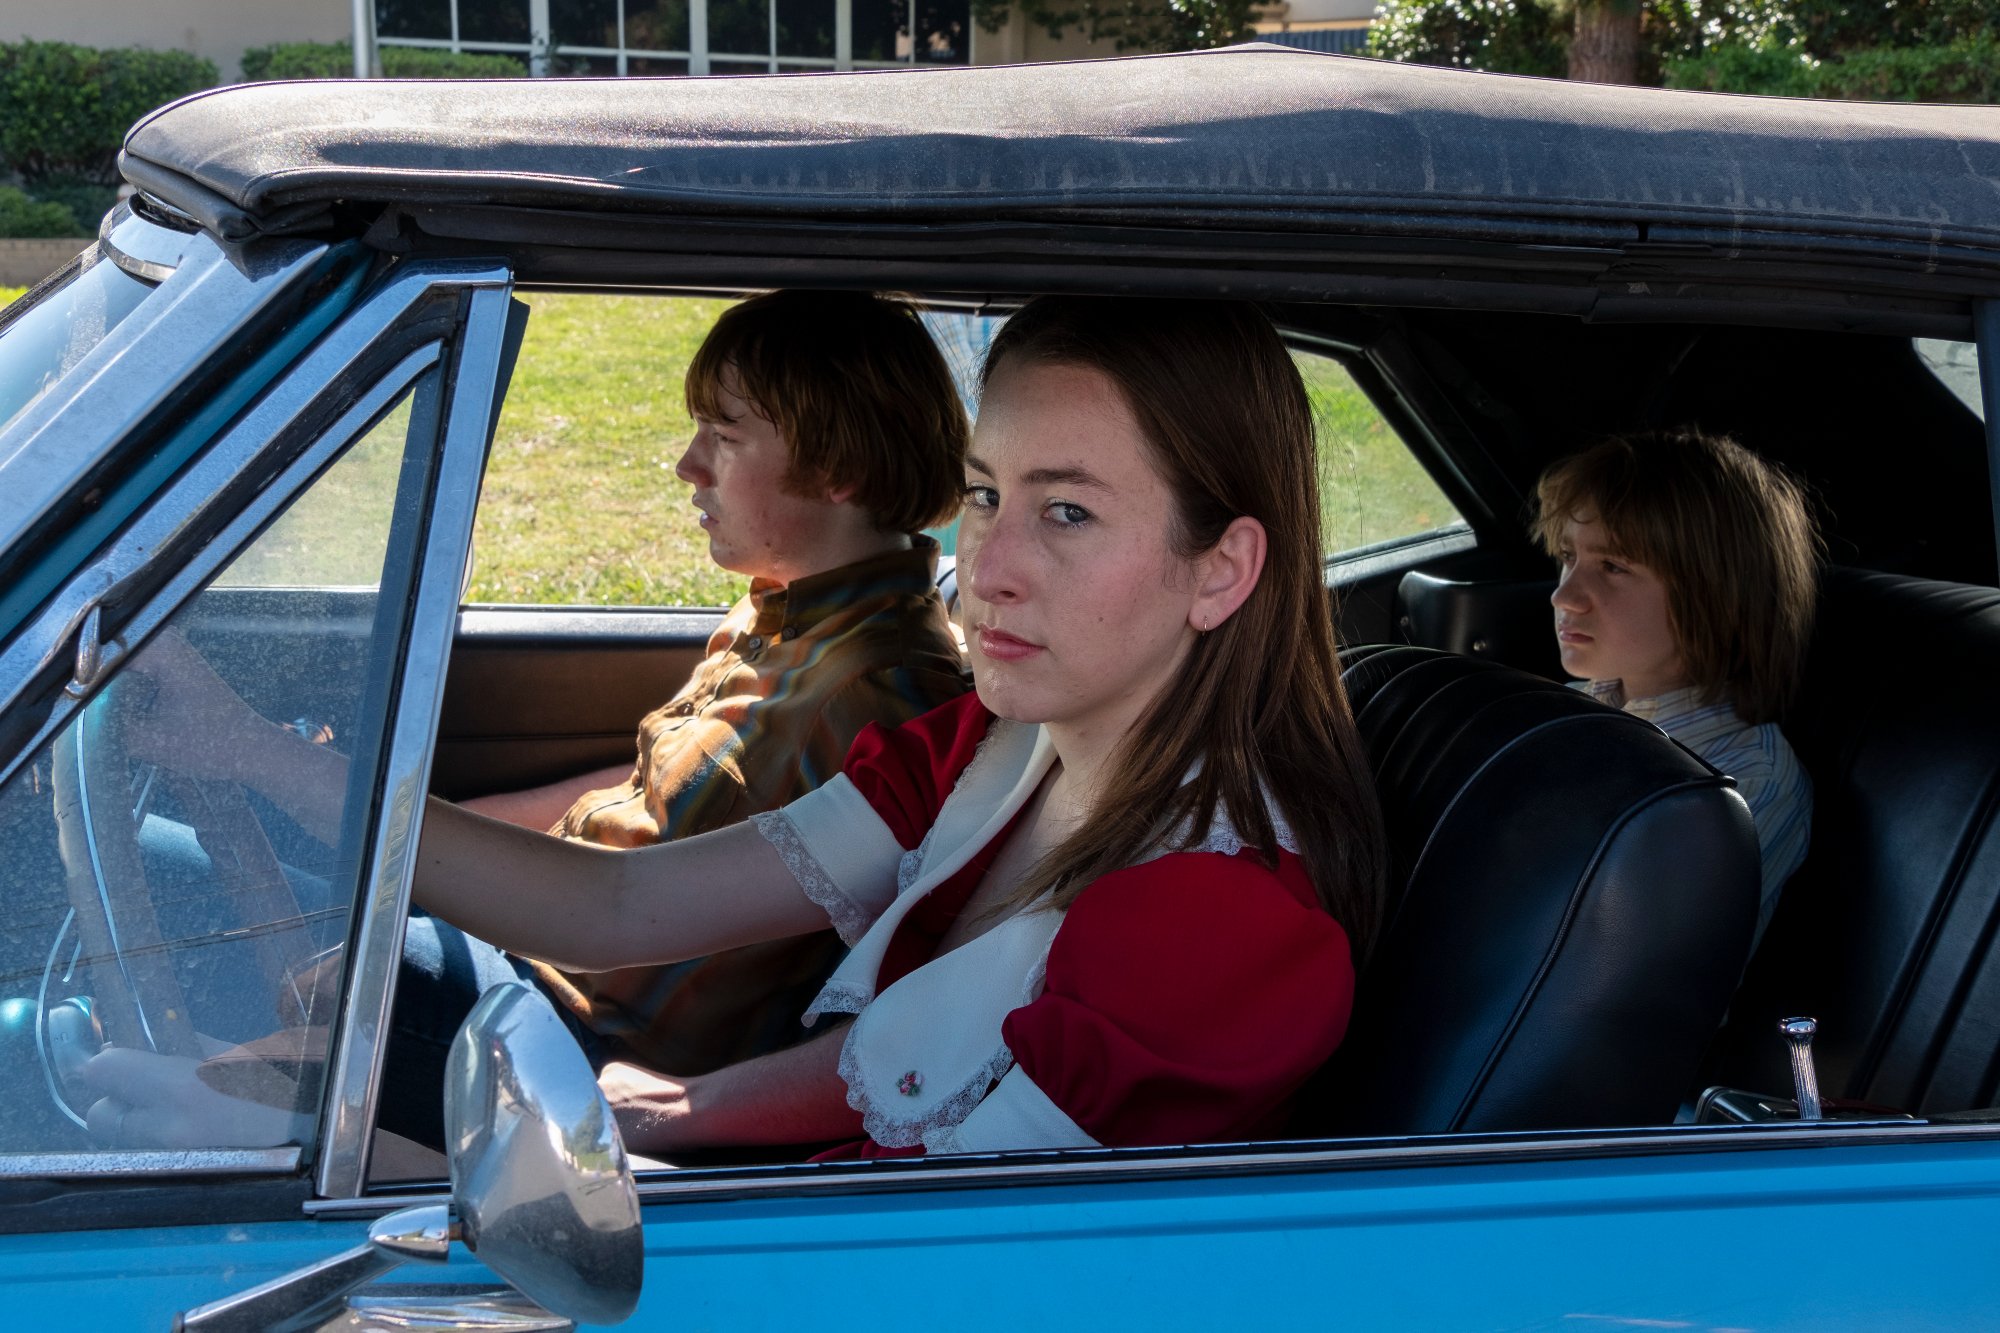 'Licorice Pizza' review actors Cooper Hoffman as Gary Valentine and Alana Haim as Alana Kane sitting in the car with grass in the background outside of the car